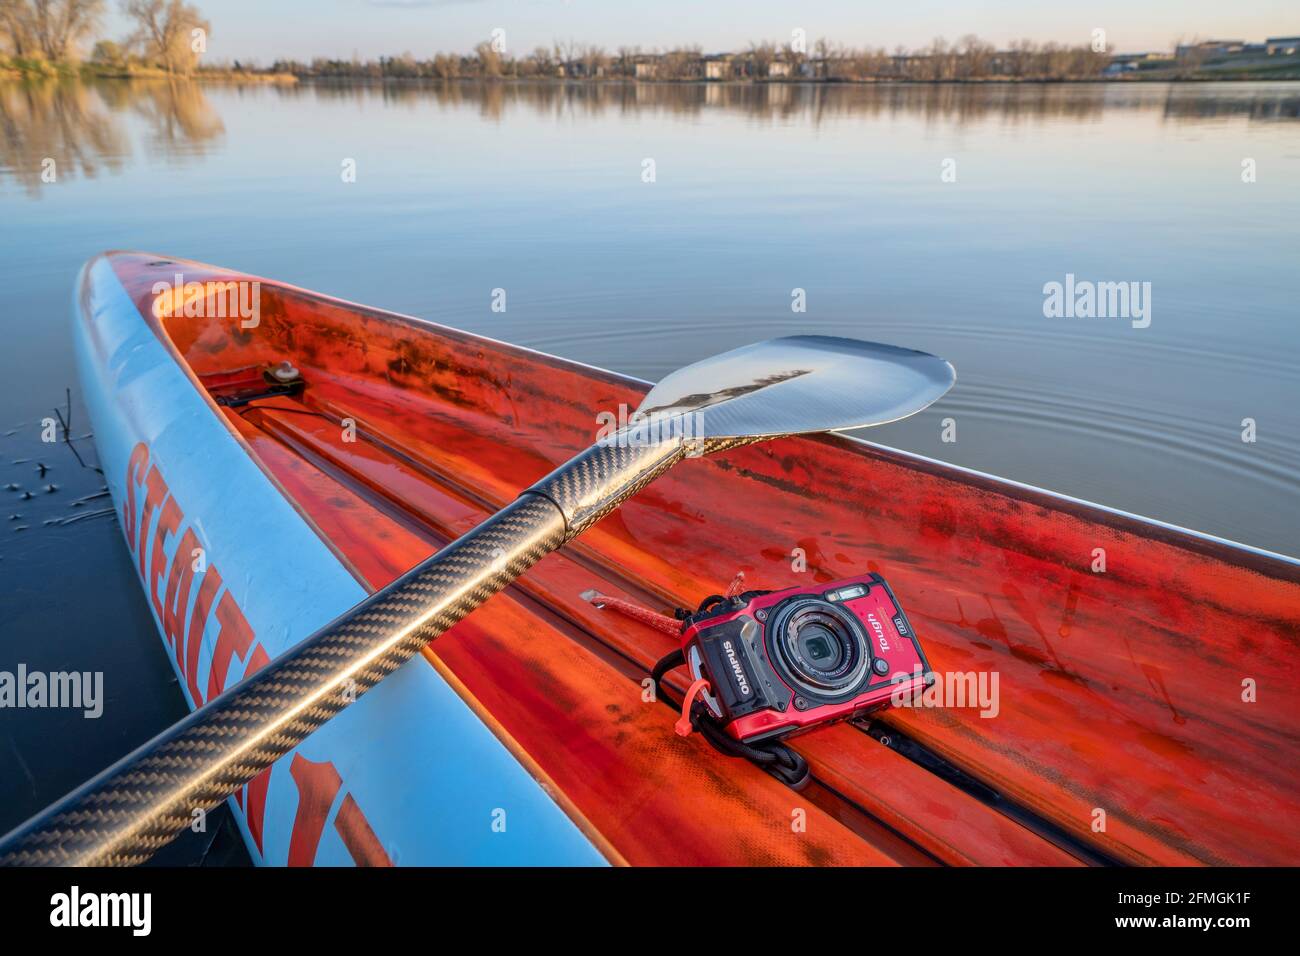 Fort Collins, CO, USA - May 6, 2021: Compact, waterproof Olympus Stylus Tough TG-5 camera on a rear deck of a stand up paddleboard by Mistral, early s Stock Photo